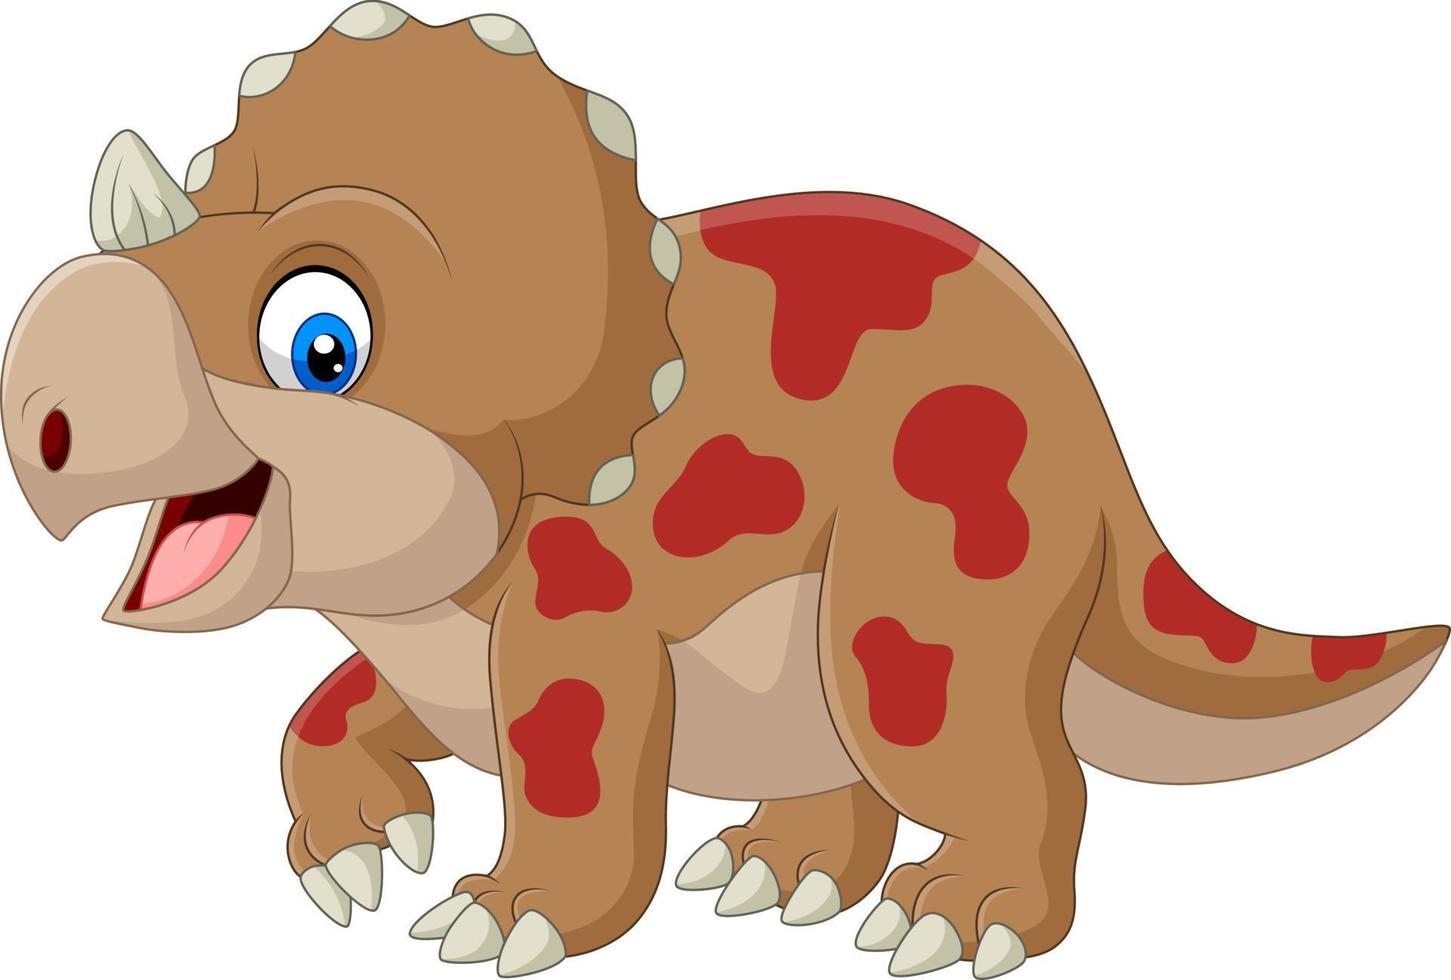 Cute triceratops cartoon on white background vector